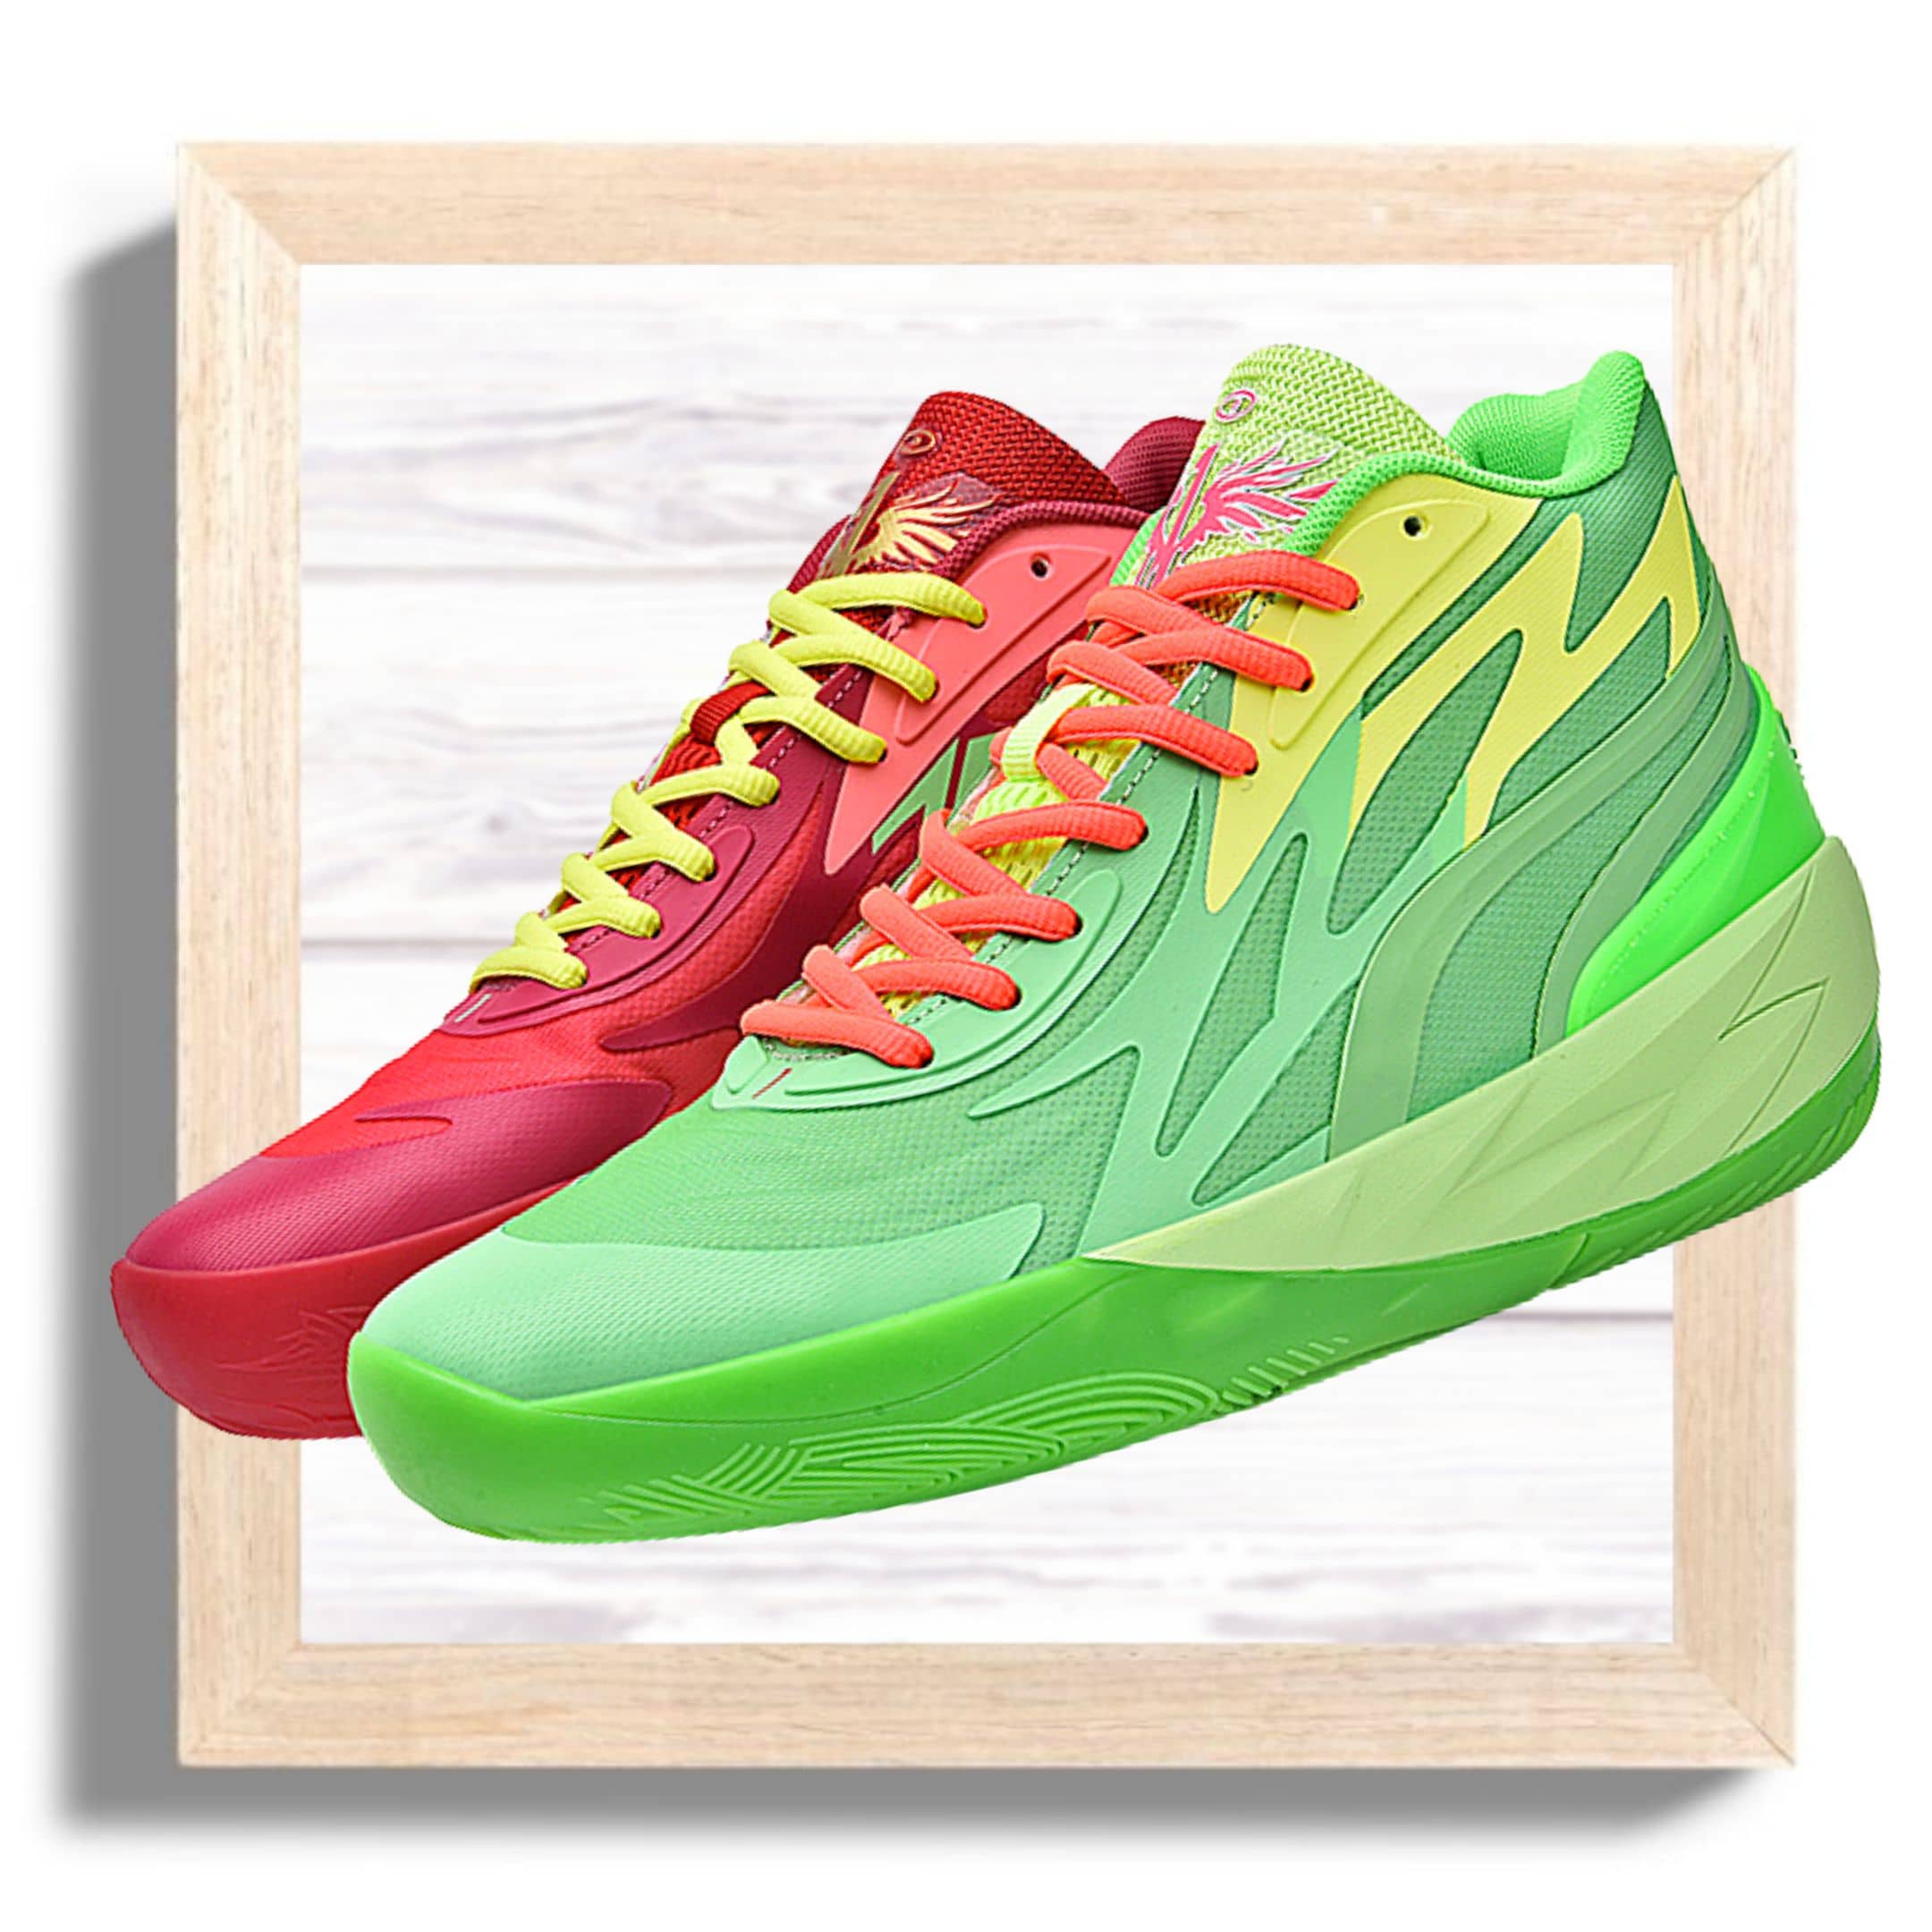 Basketball Shoes 23 - Our Products/Footwear - LaceGo